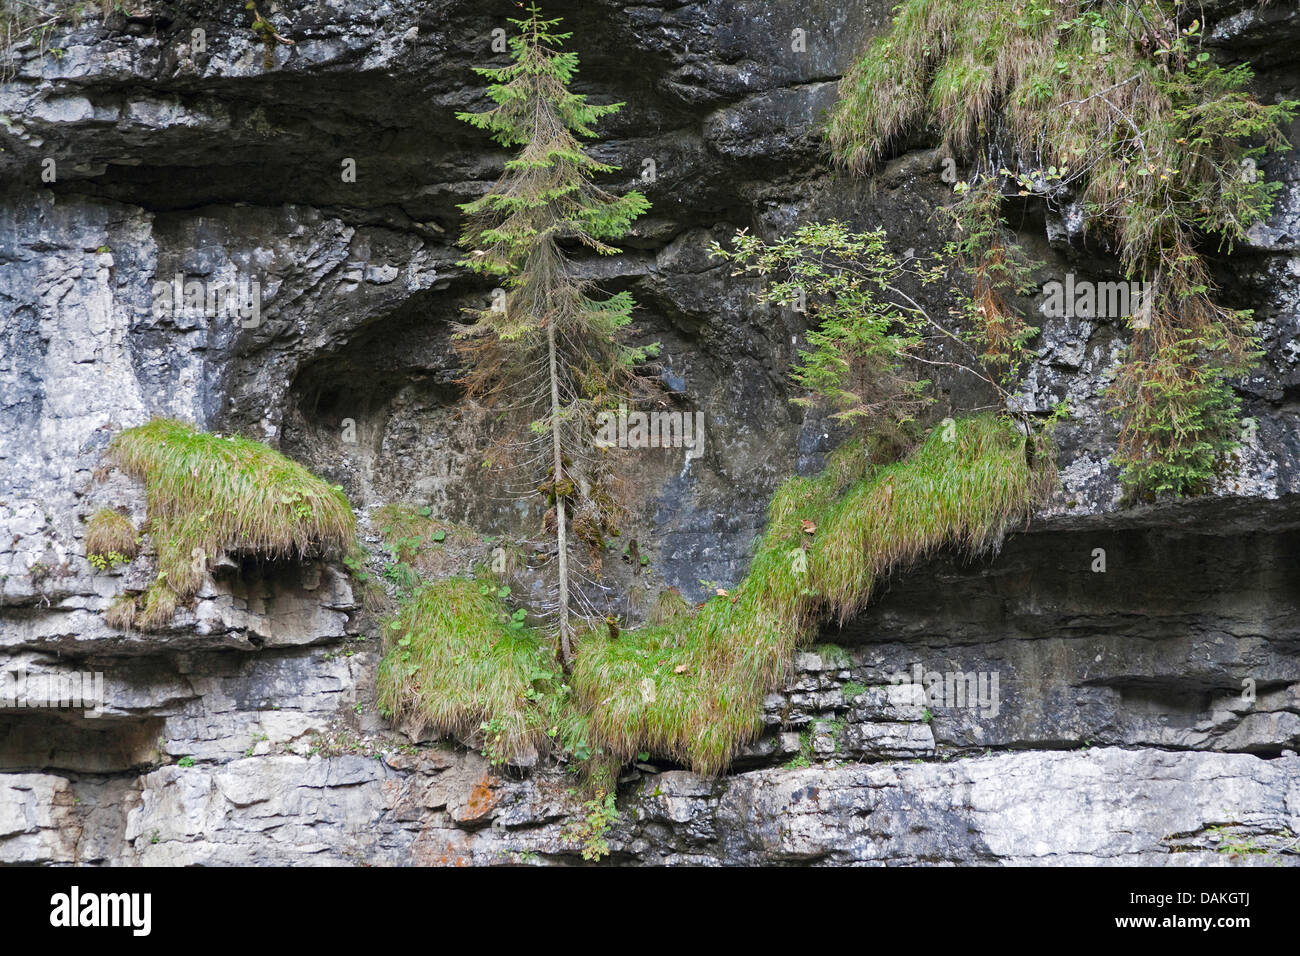 Norway spruce (Picea abies), growing in a rock wall of the Breitachklamm in the Kleinwalsertal, Germany, Bavaria Stock Photo